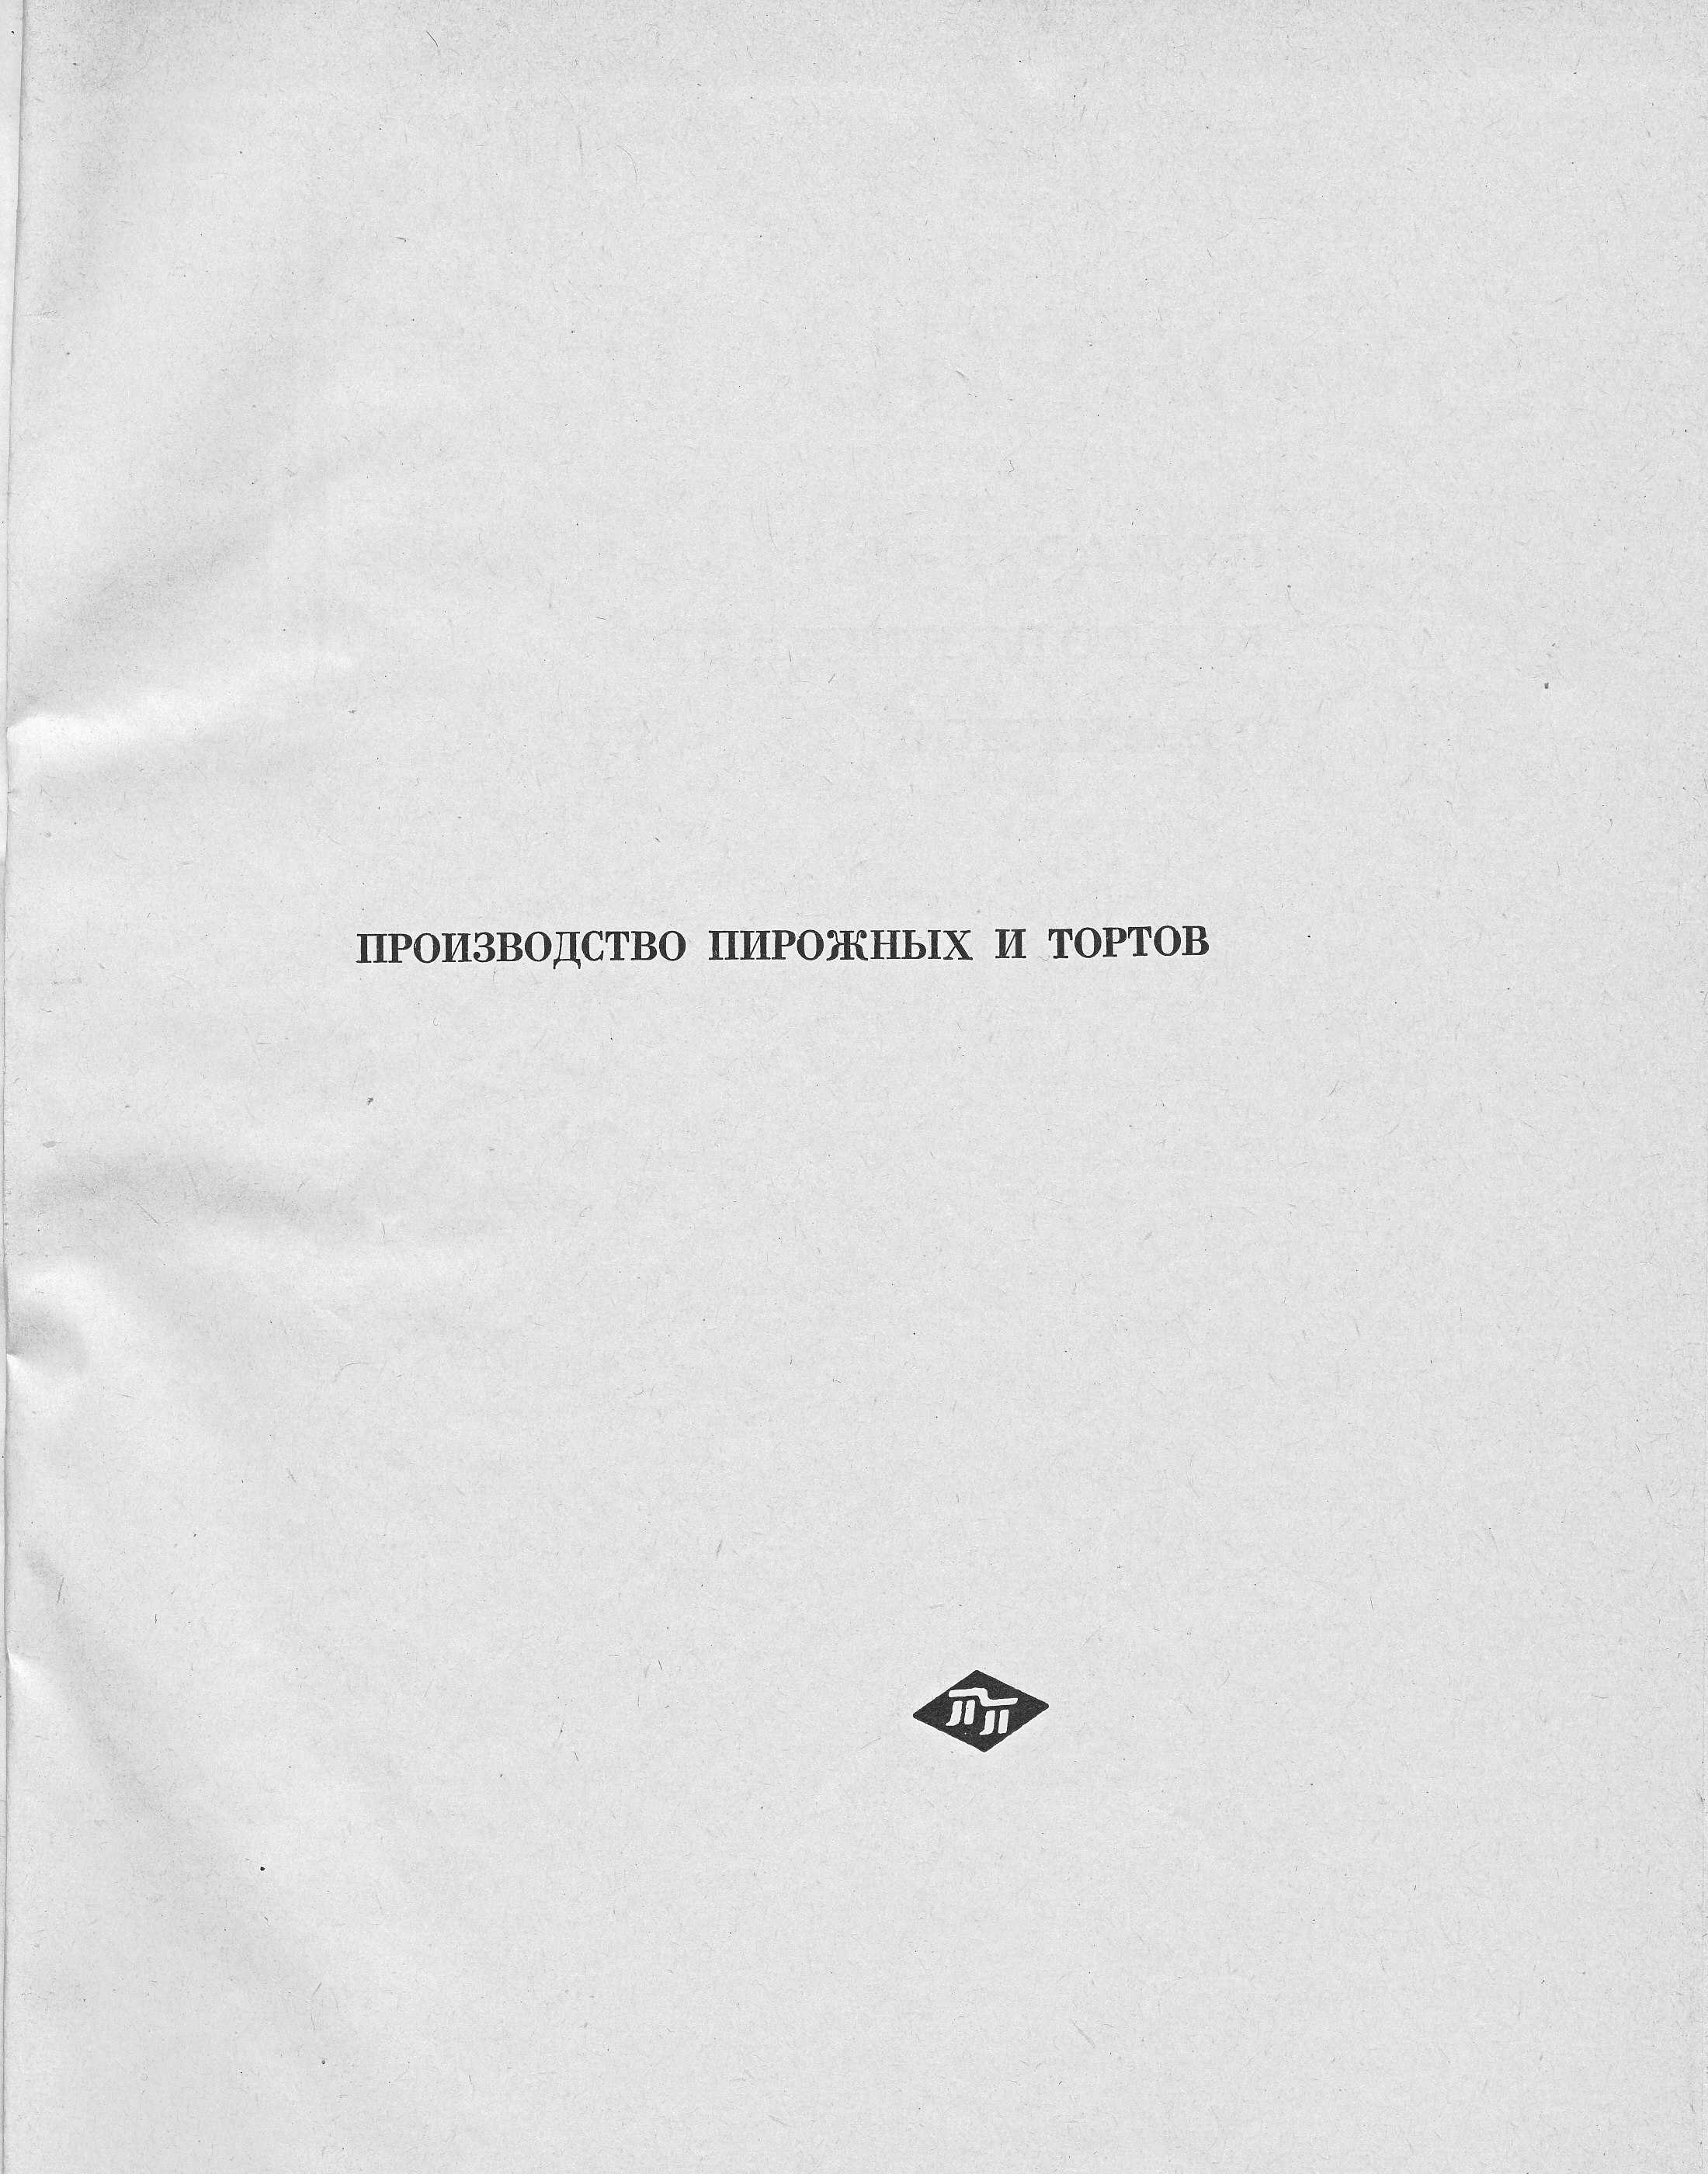 Production of pastries and cakes P.S. Markhel, Yu.L. Gopenshtein, S.V. Smelov 1974  page 1